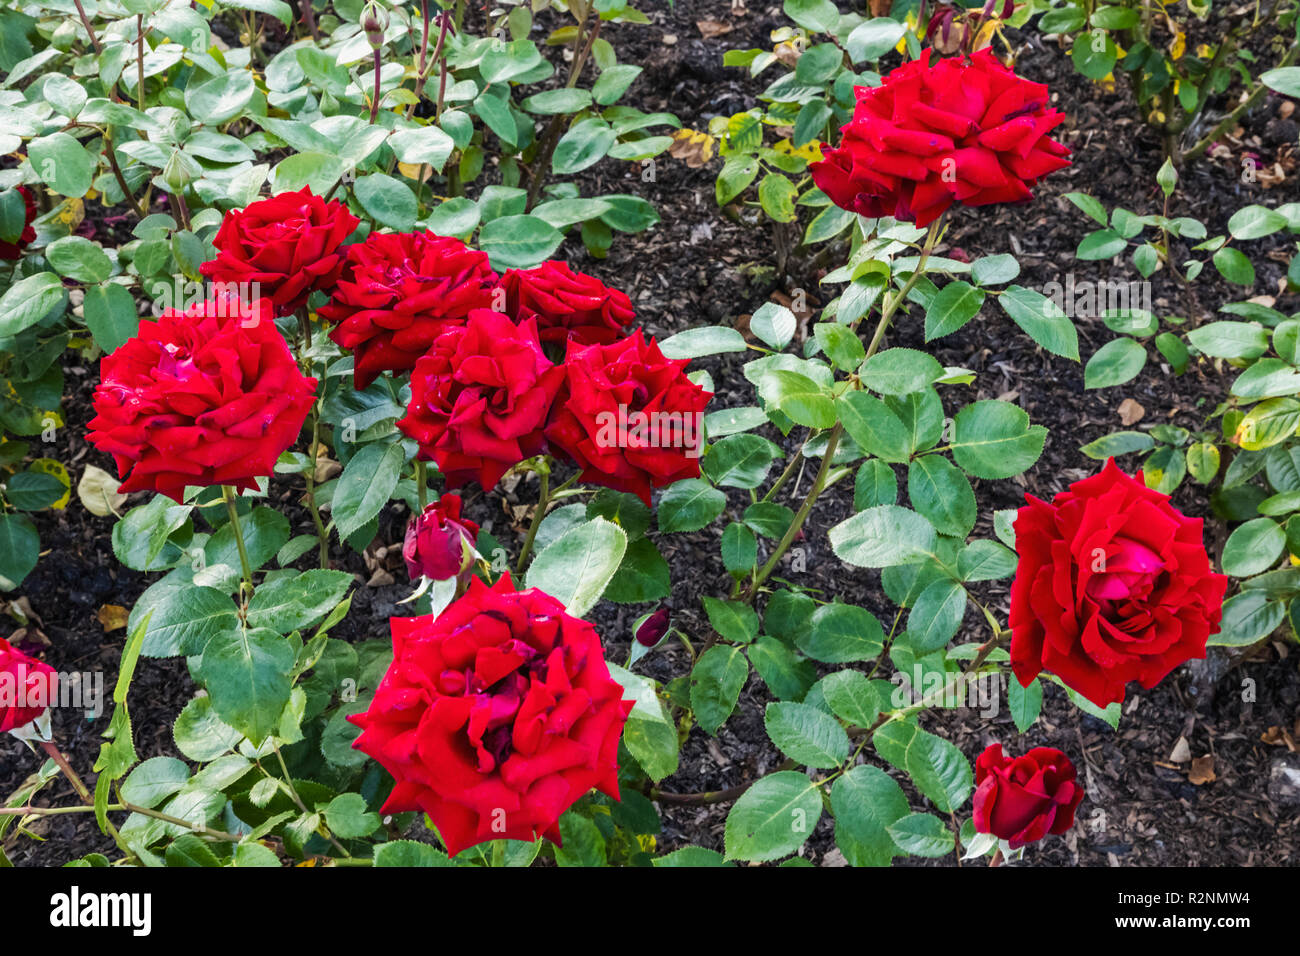 England, London, Regents Park, Queen Mary's Gardens, Roses Stock Photo